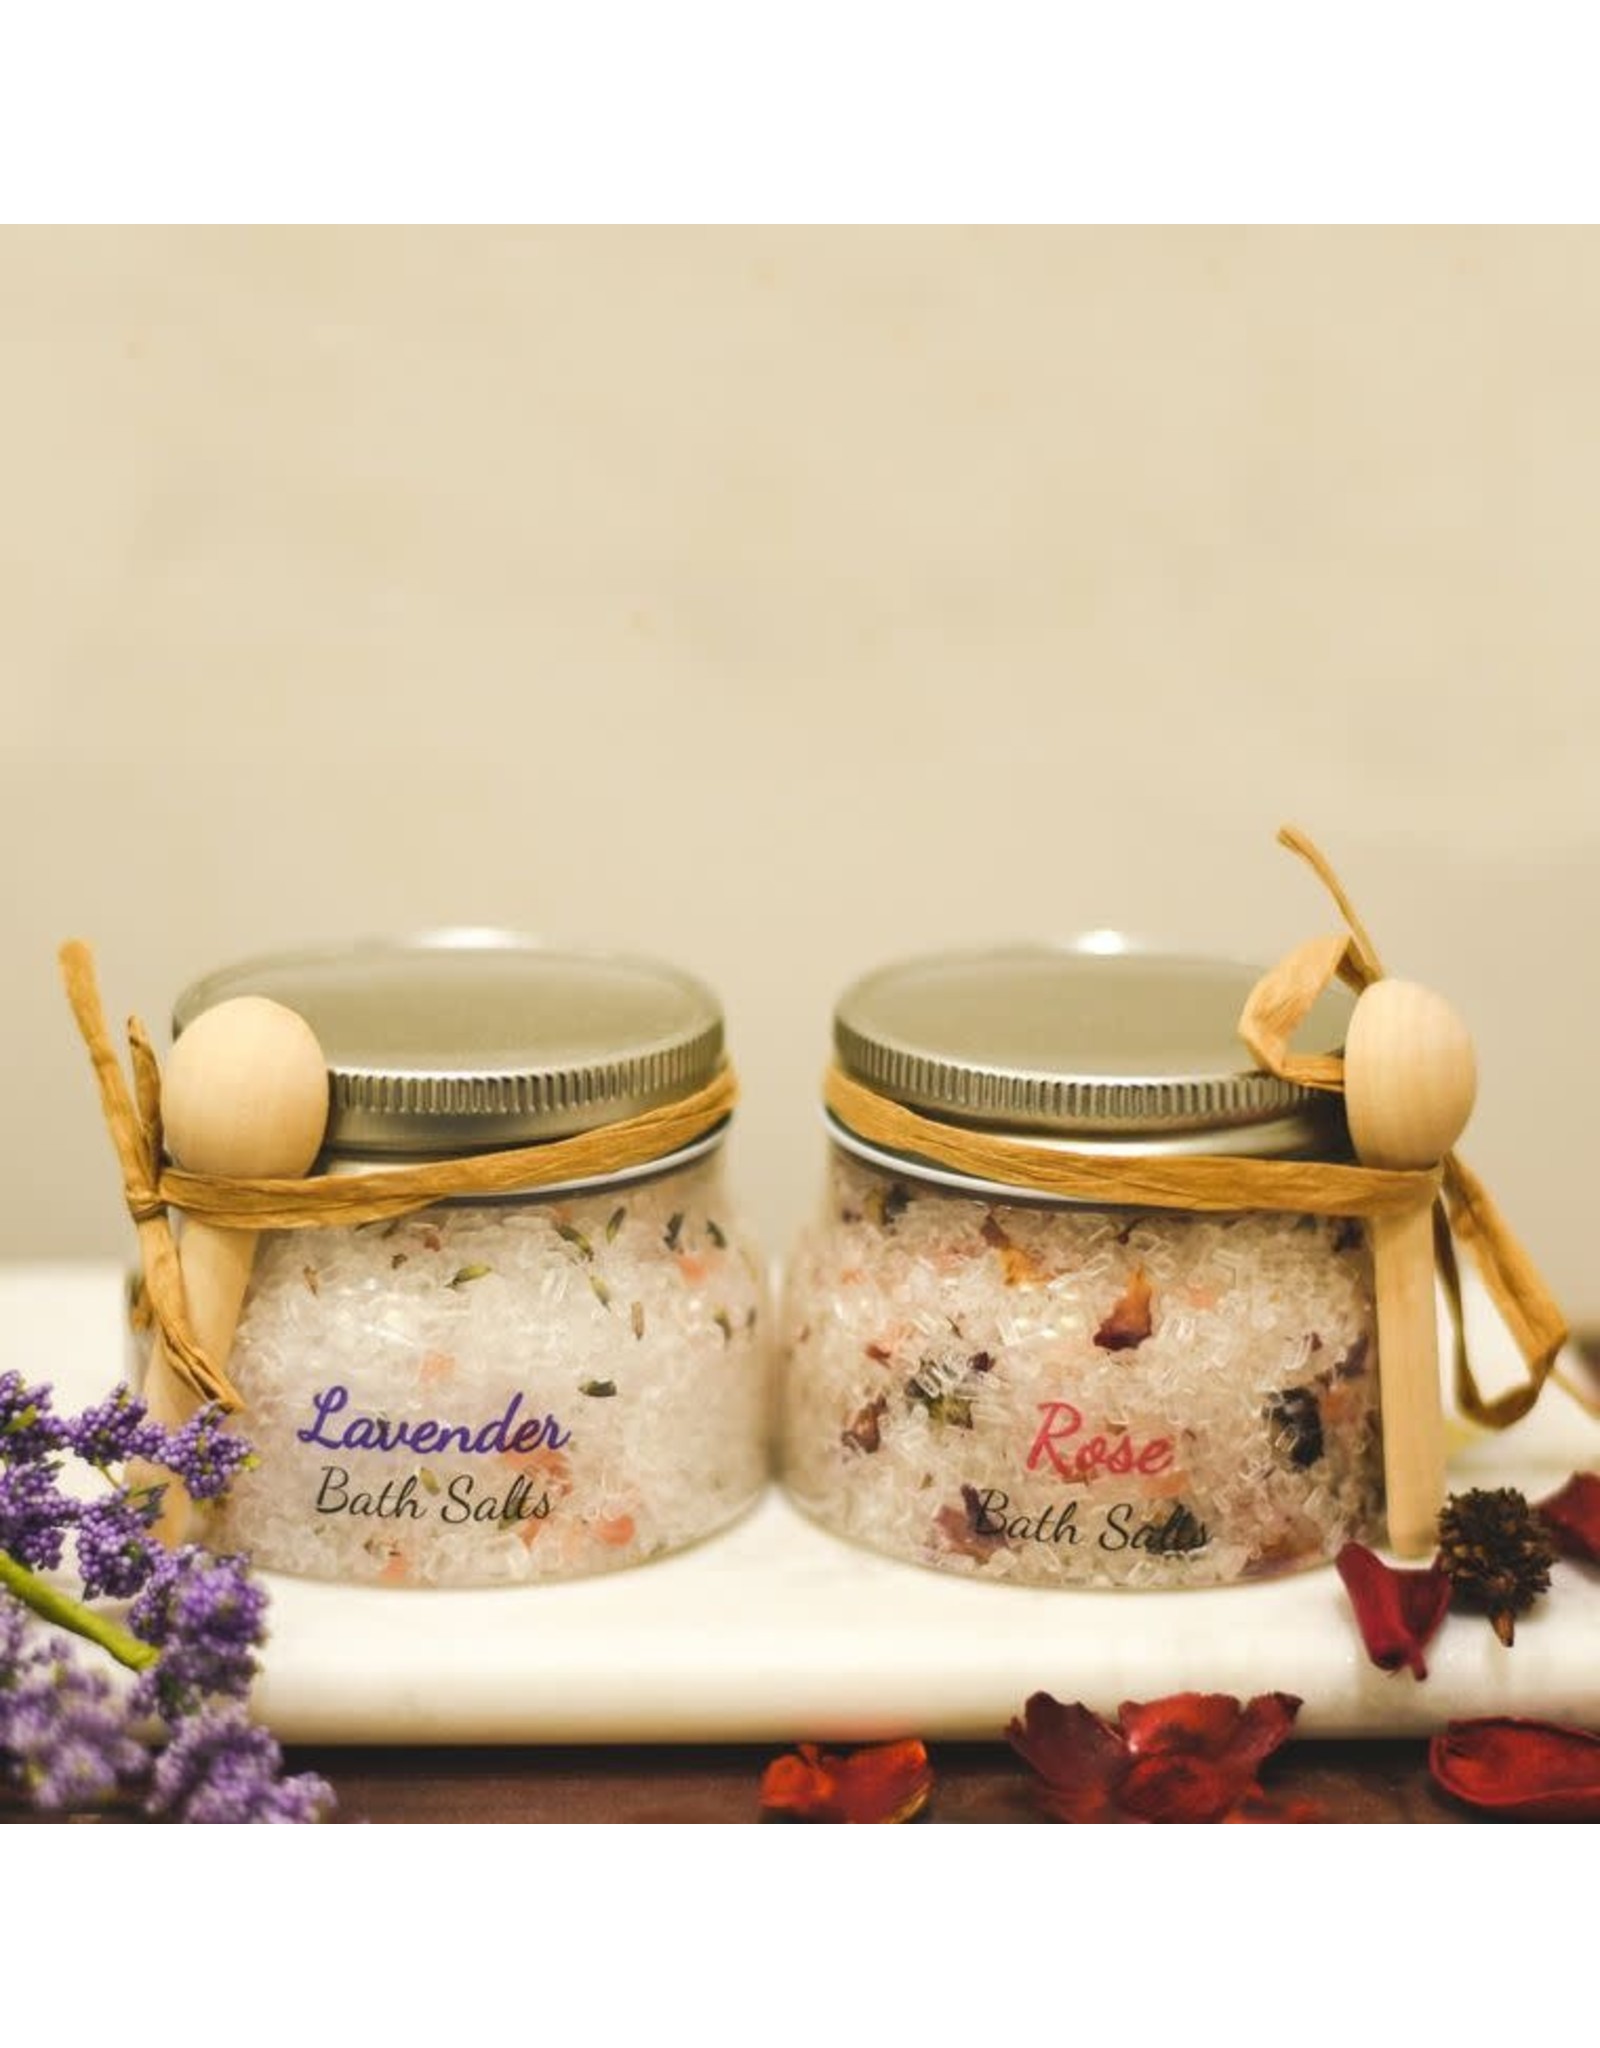 Oily Blends Spa Salts Made With Essential Oils - Lavender